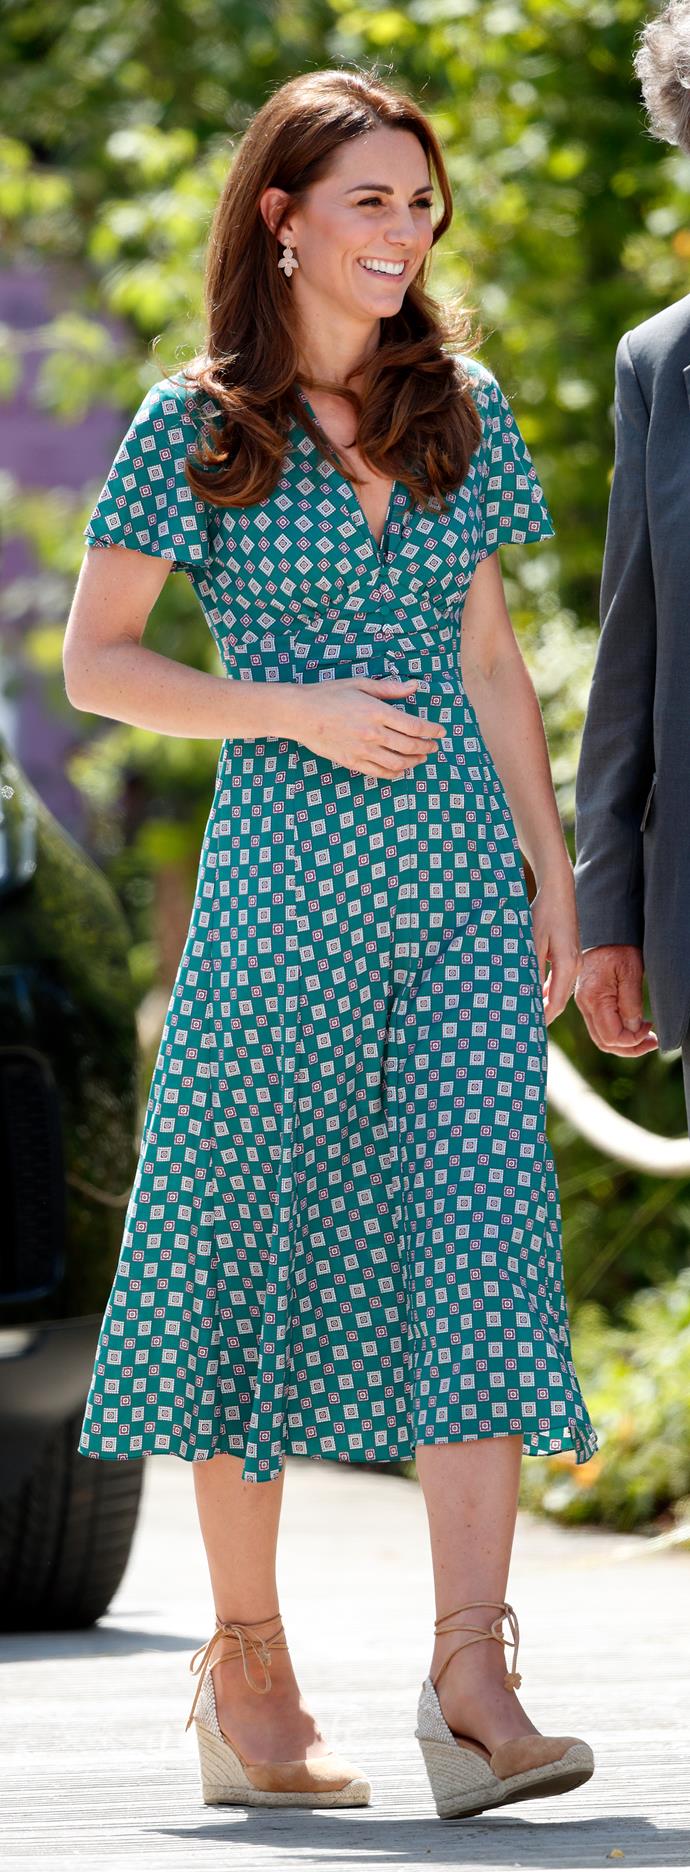 Weeks later, Kates had yet another golden summer moment when she wore this beautiful Sandro Paris dress featuring a trendy geometric print to [Hampton Court](https://www.nowtolove.com.au/royals/british-royal-family/kate-middleton-hampton-court-garden-56761|target="_blank"). She's the summery gift that never stops giving!